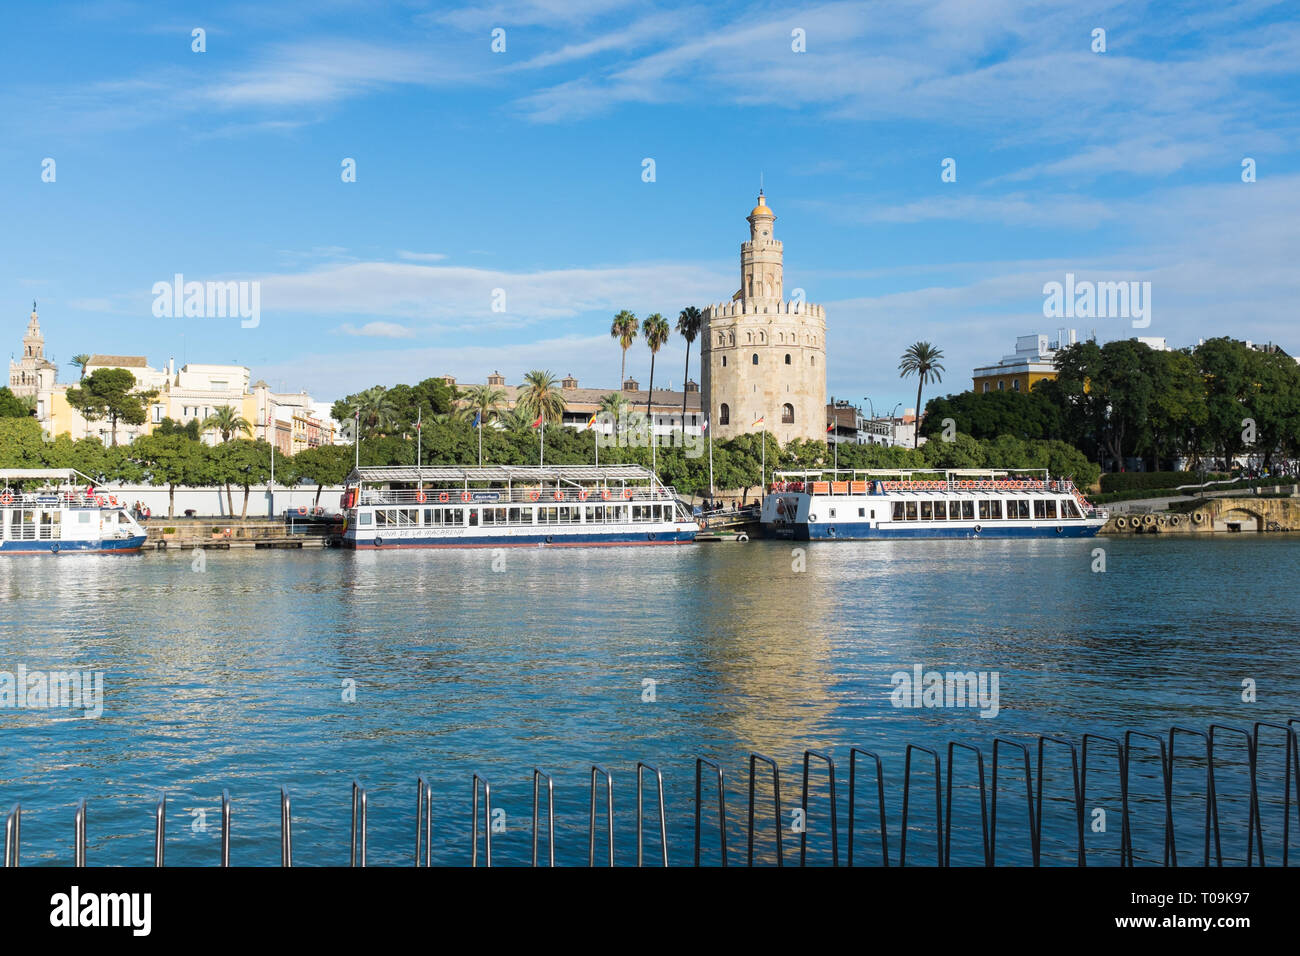 Torre del Oro naval museum on the bank of the River Guadalquivir in Seville, Spain Stock Photo